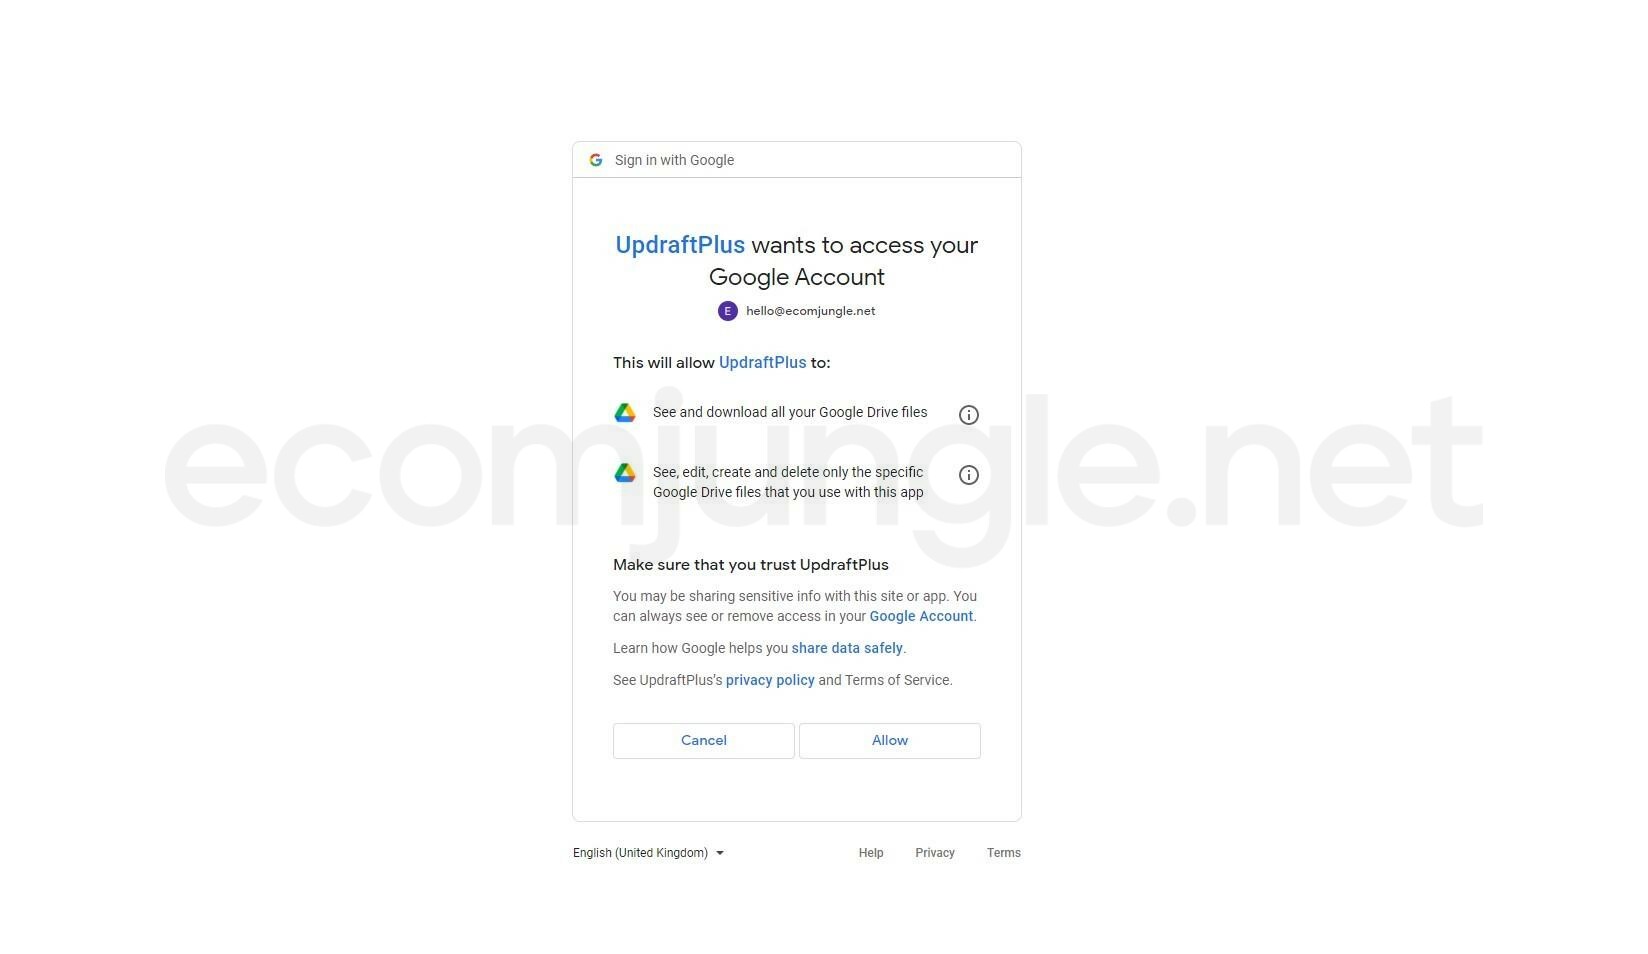 UpdraftPlus wants to access your Google Account